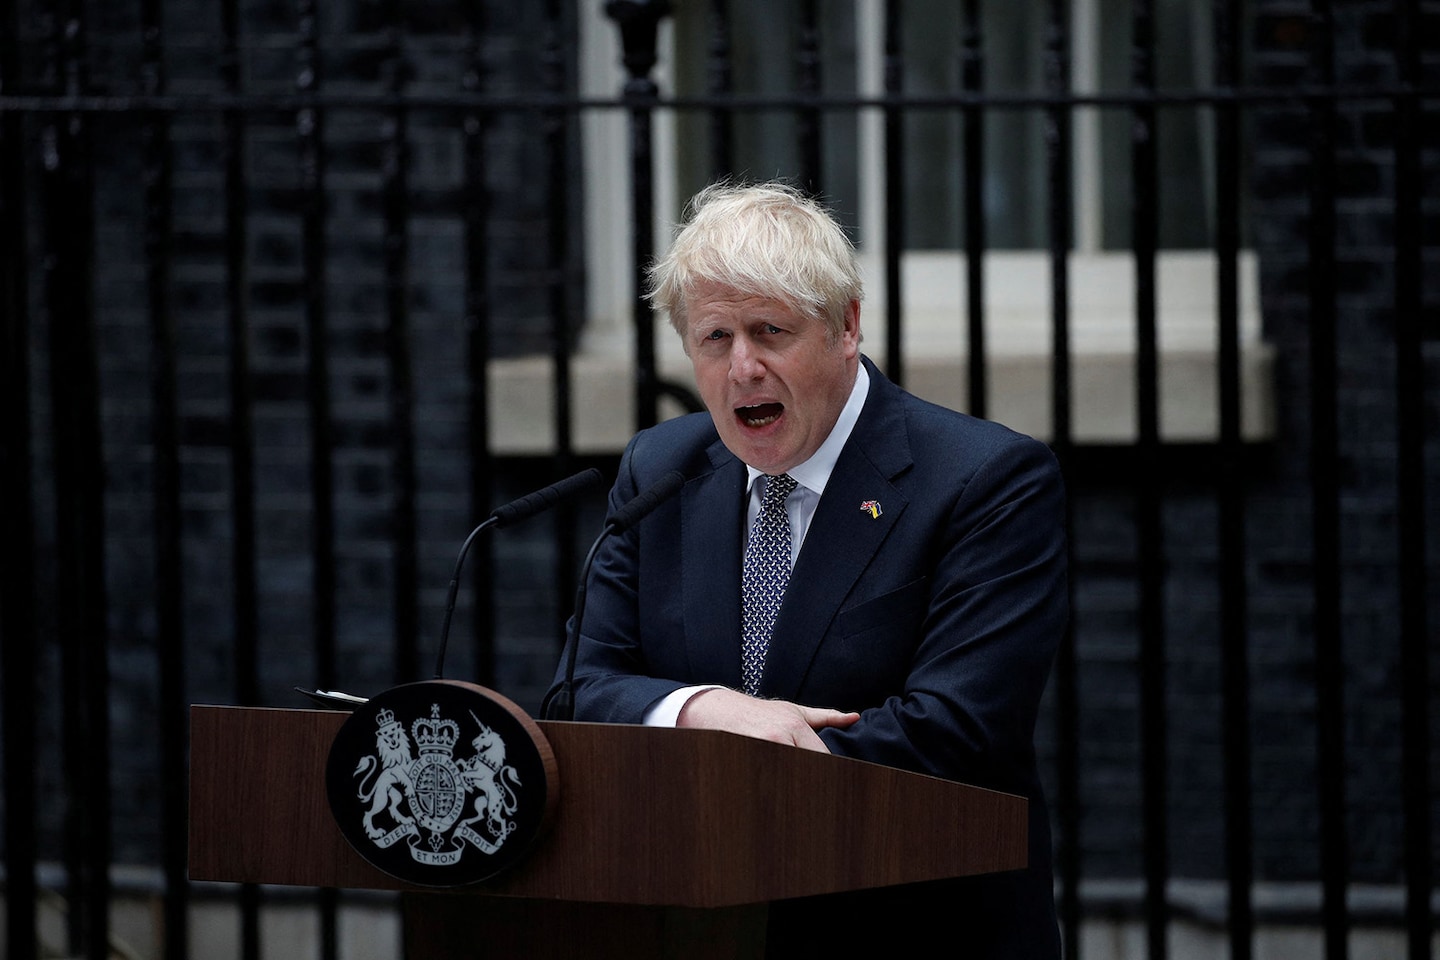 You are currently viewing Boris Johnson resigns live updates: Prime minister steps down as party leader